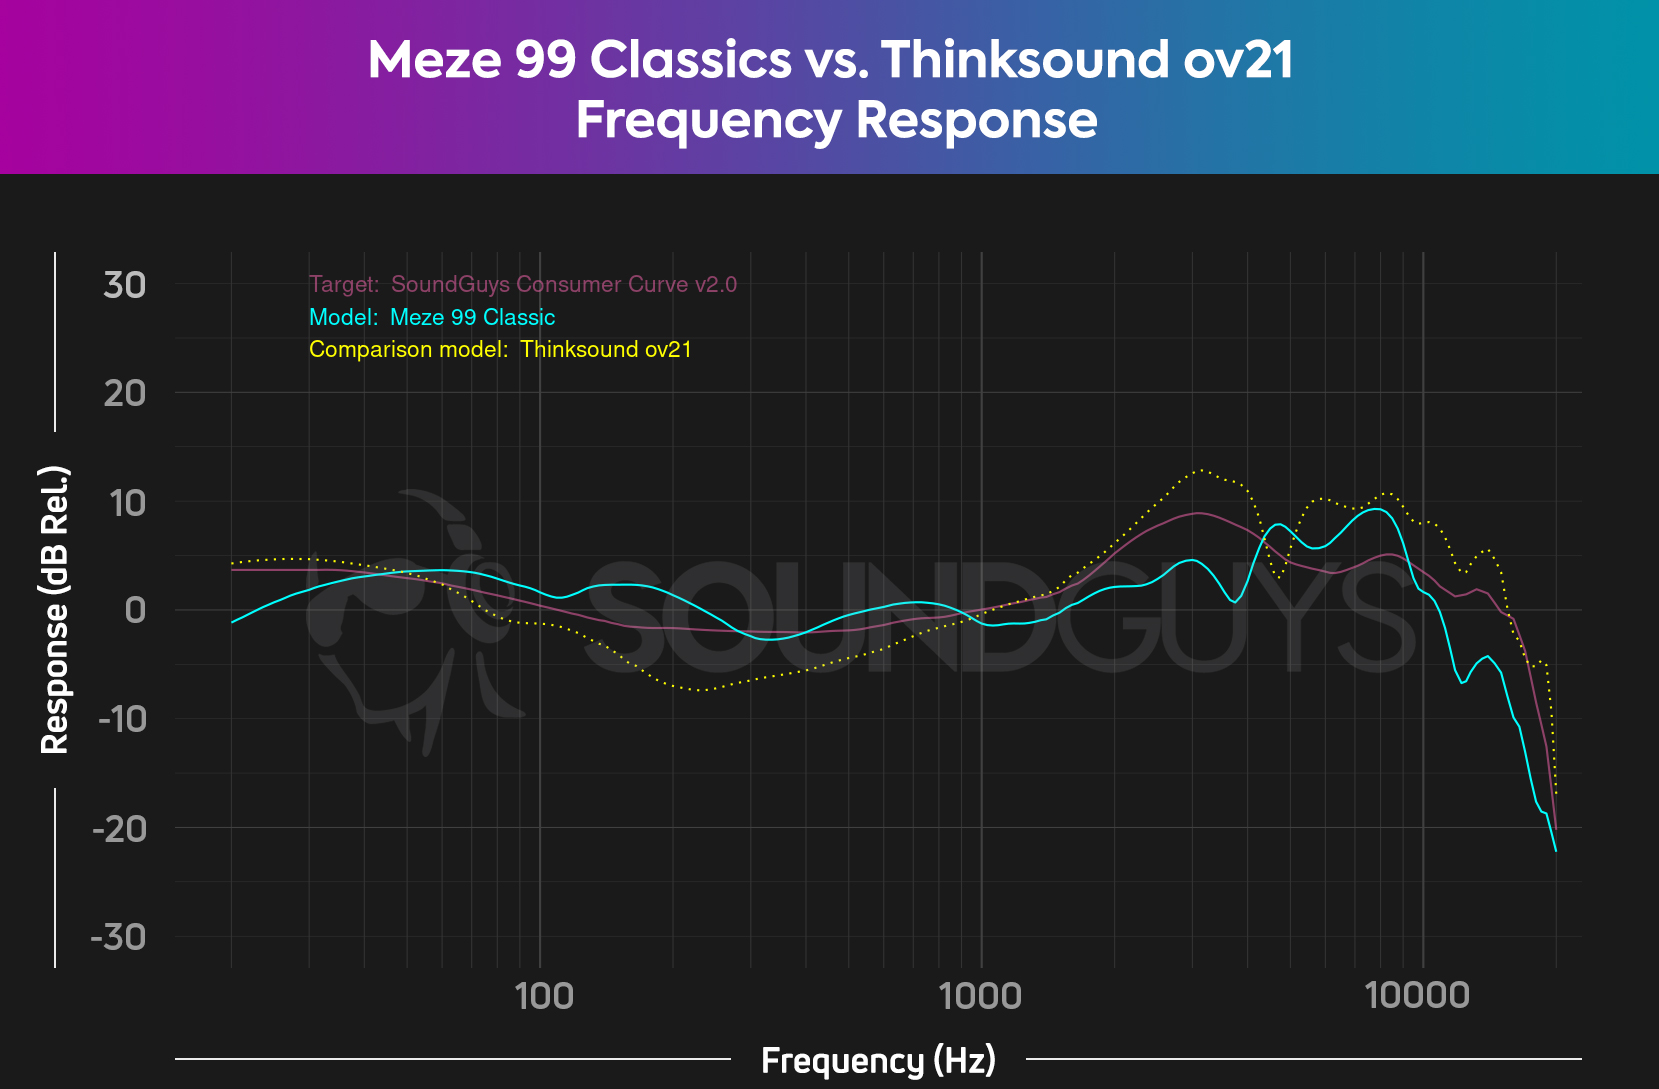 The Meze 99 Classics offer a flatter frequency response than the Thinksound ov21.